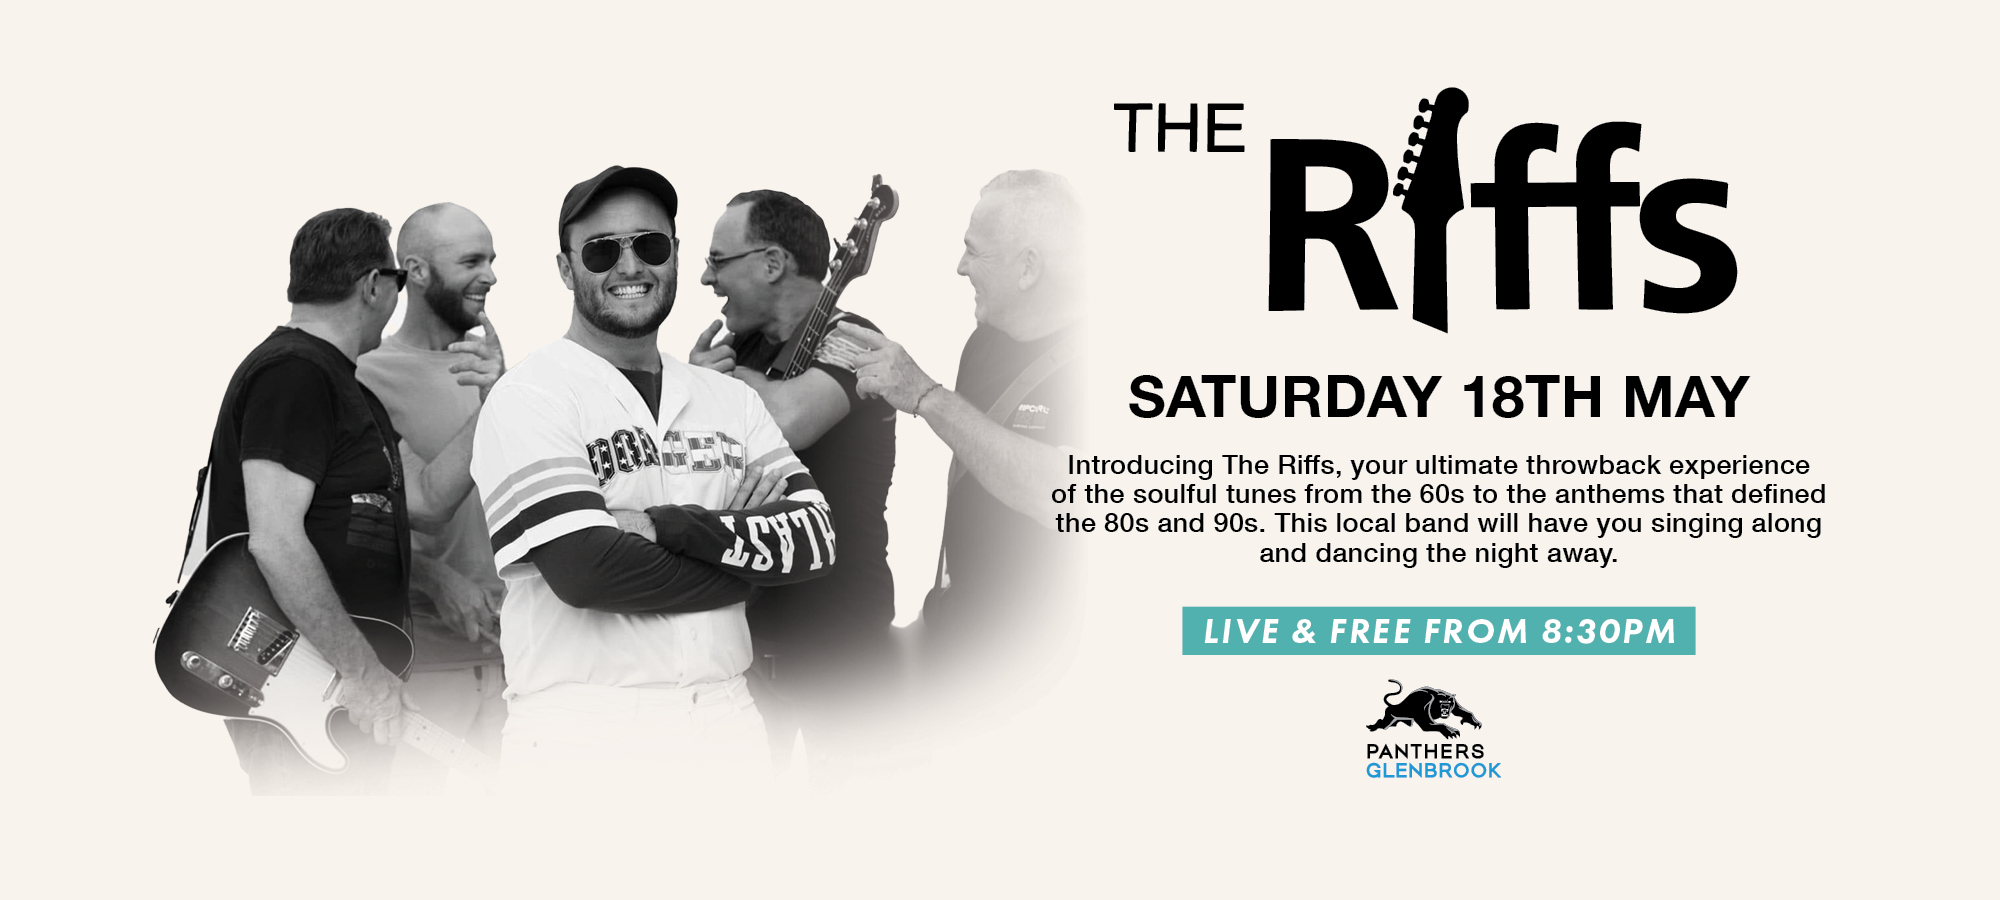 The Riffs – Saturday Live Entertainment in May